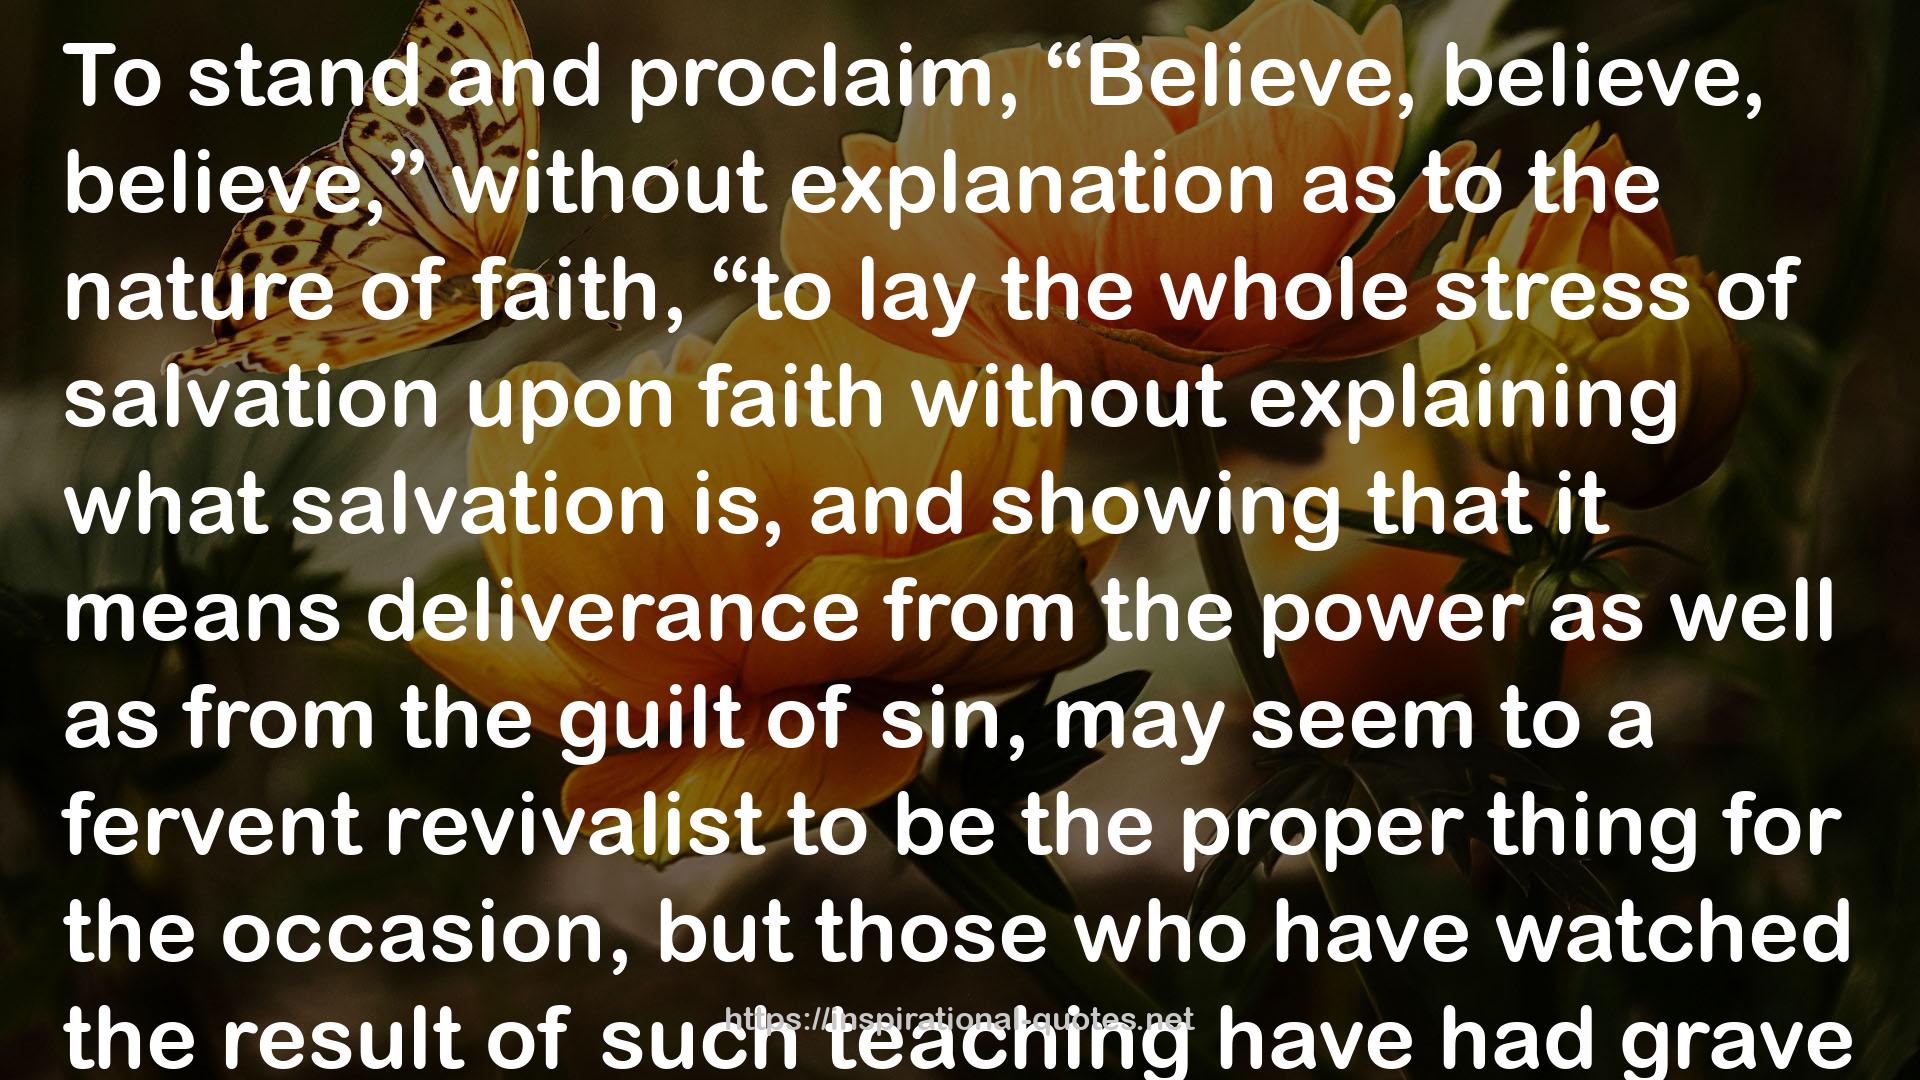 Living by Revealed Truth: The Life and Pastoral Theology of Charles Haddon Spurgeon QUOTES